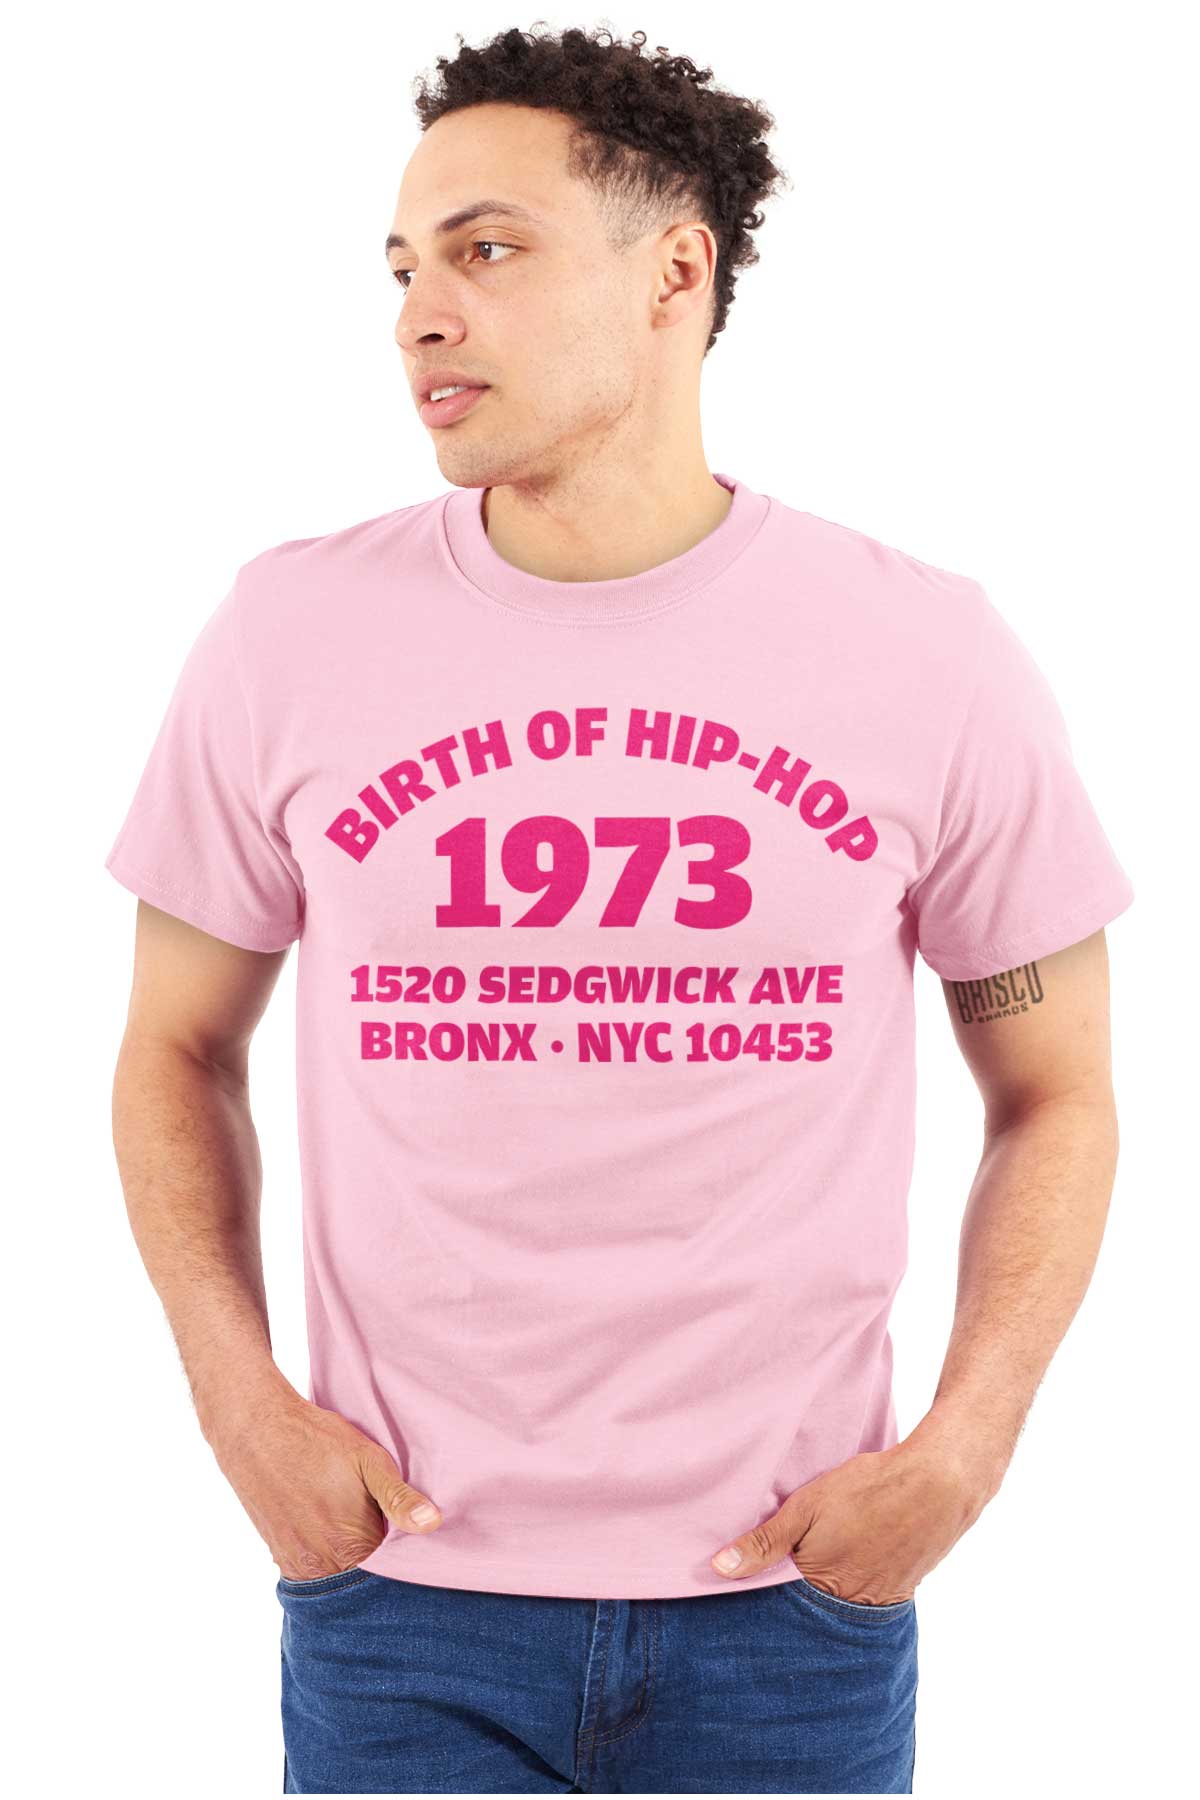 This image represents the start of Hip Hop in 1973 and honors 50 years of music, with a special emphasis on women's involvement.